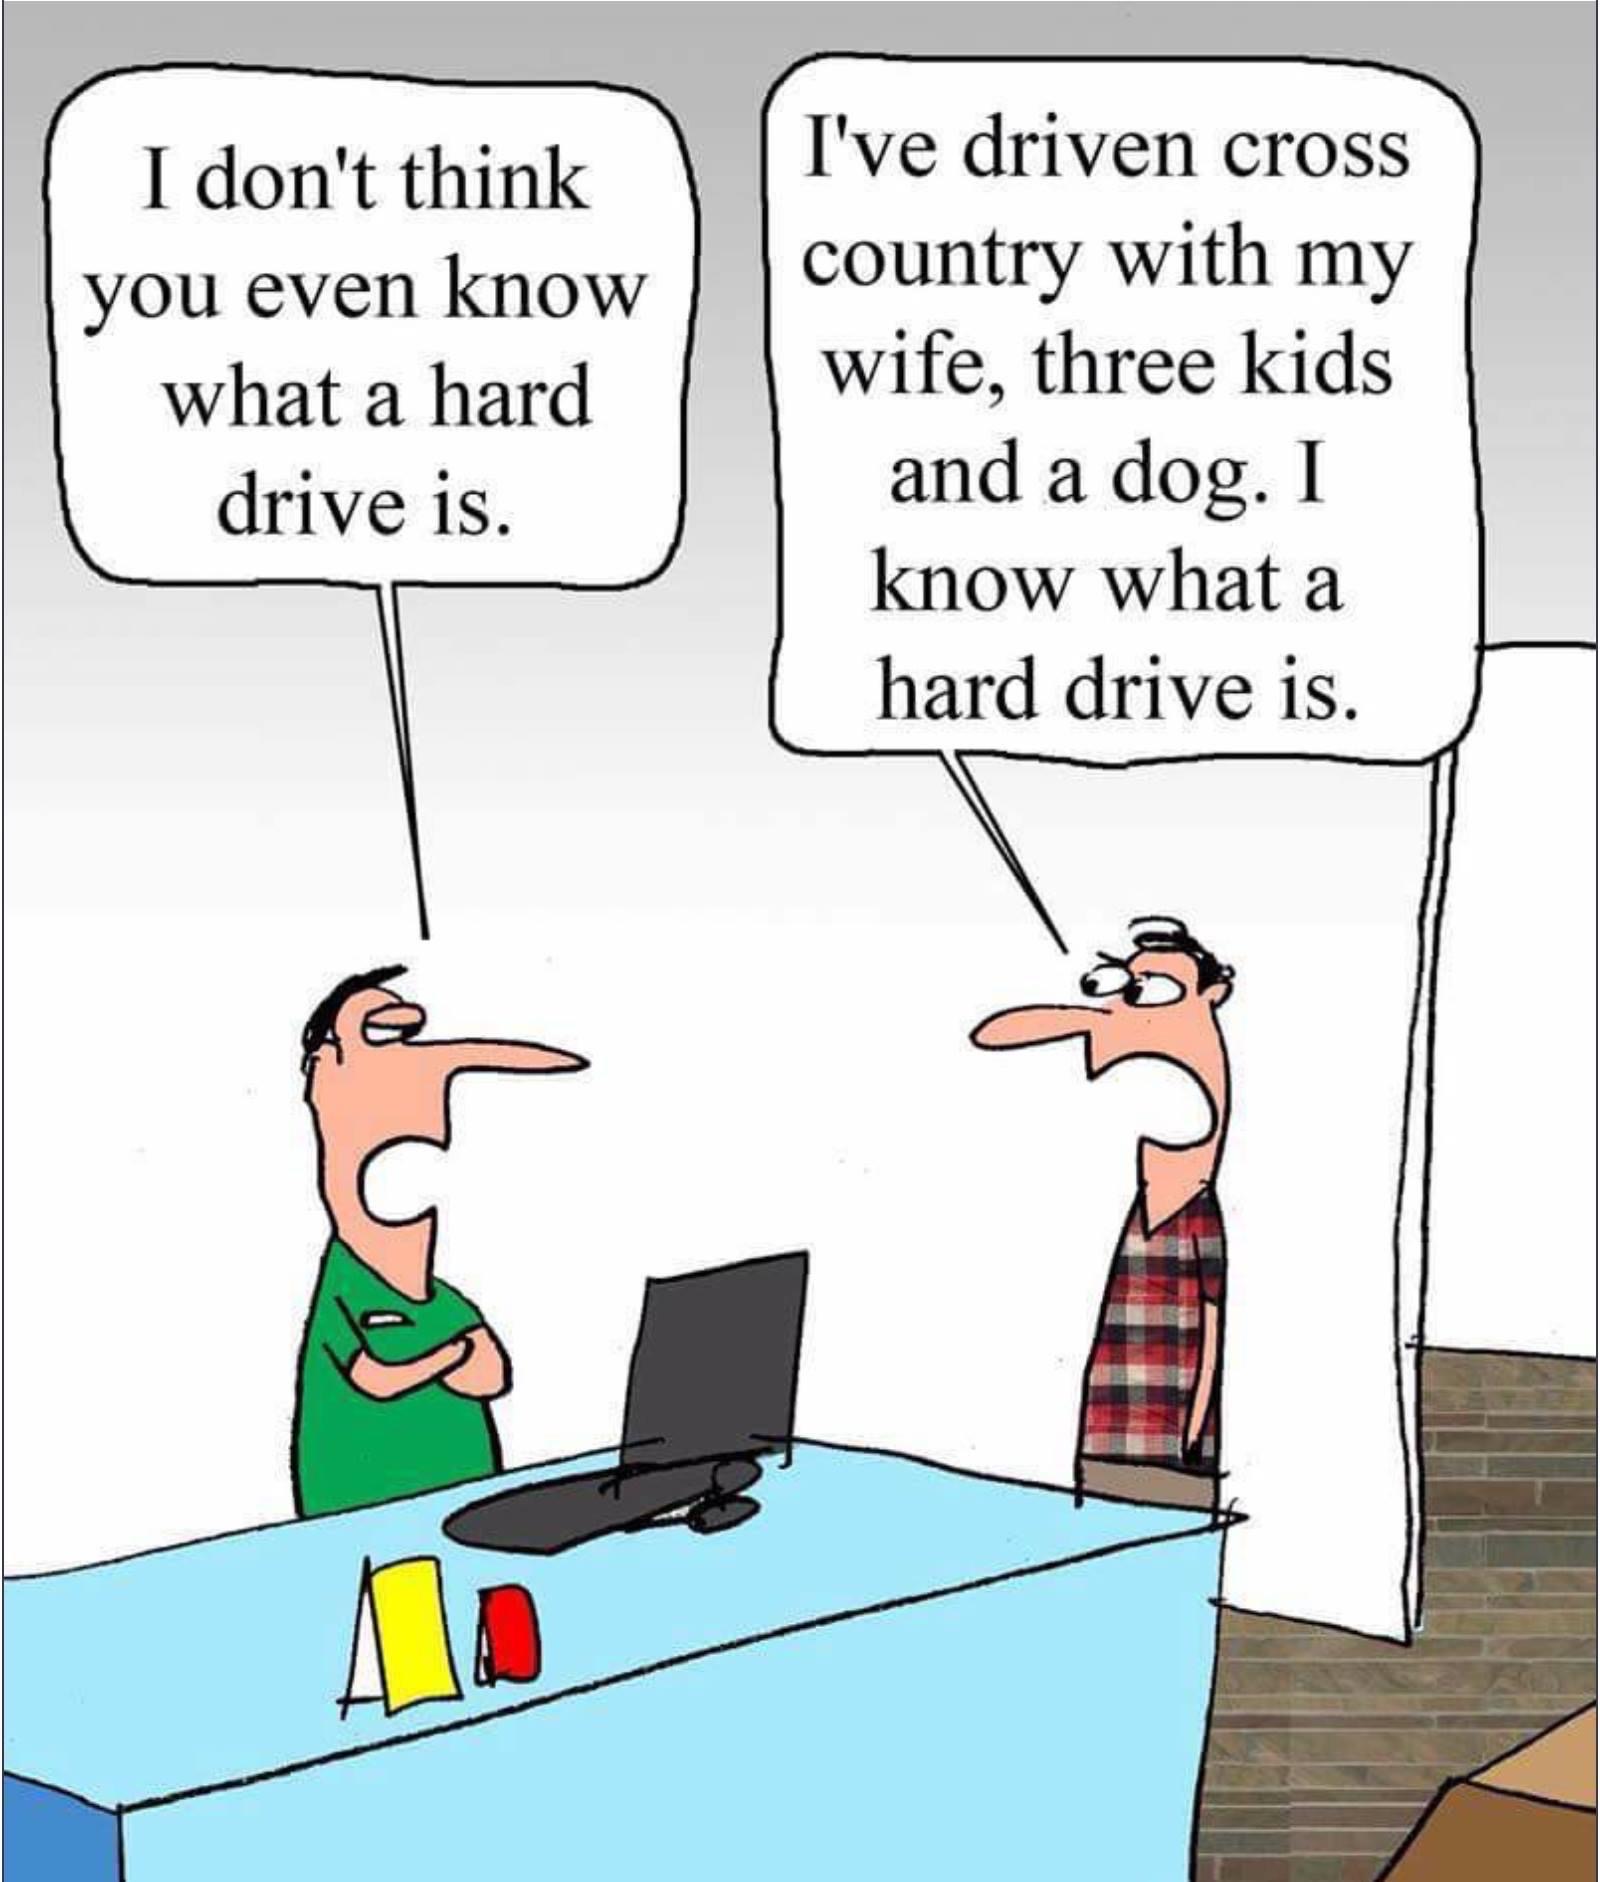 hard puns - I don't think you even know what a hard drive is. I've driven cross country with my wife, three kids and a dog. I know what a hard drive is.